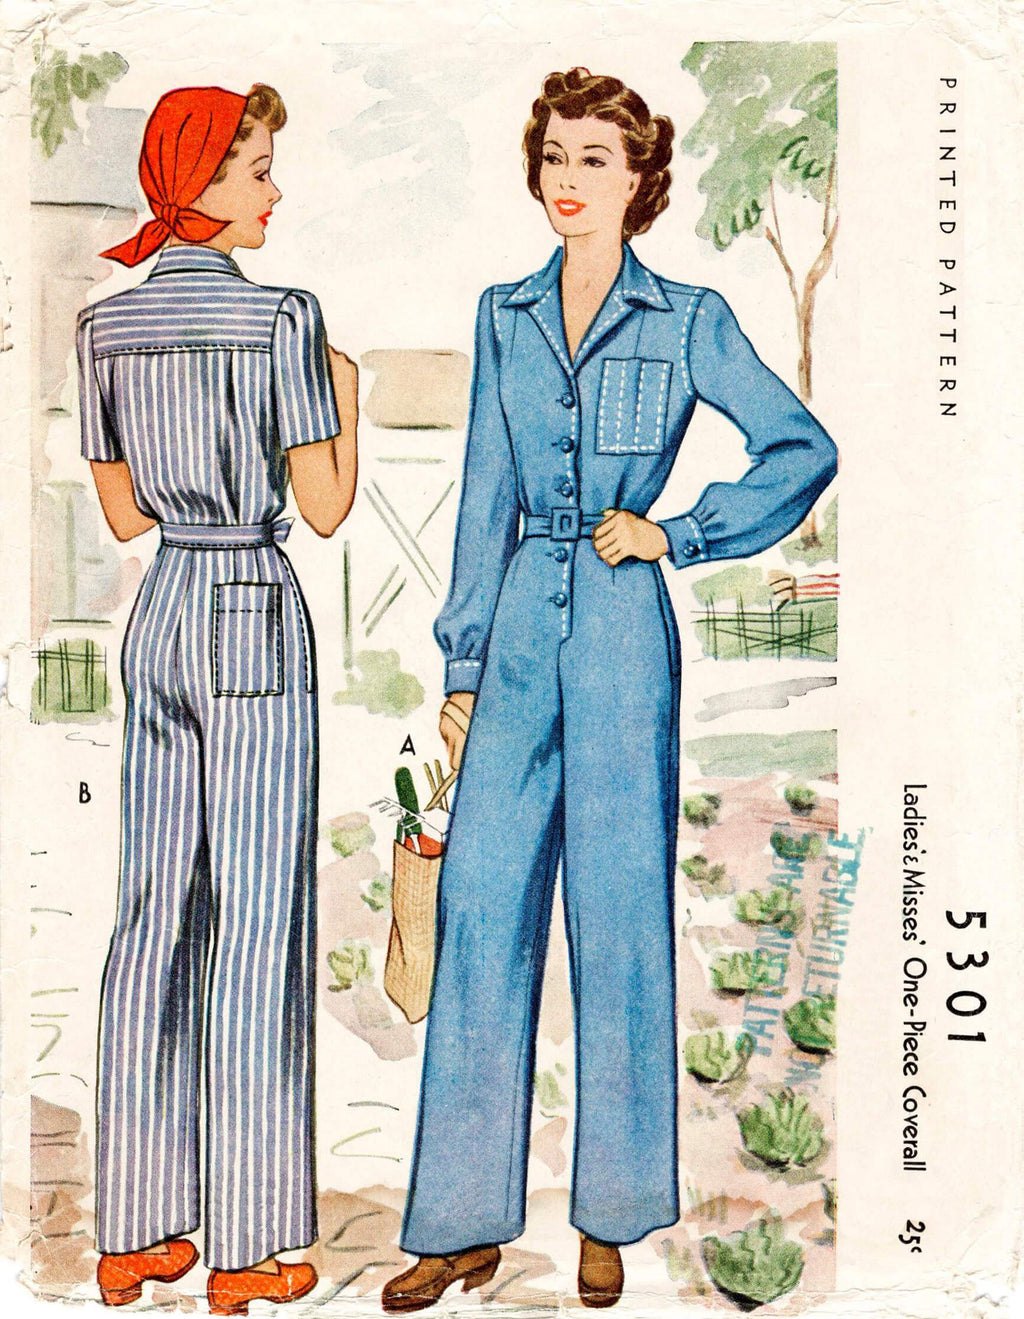 McCall 5301 1940s coveralls vintage sewing pattern Rosie the Riveter